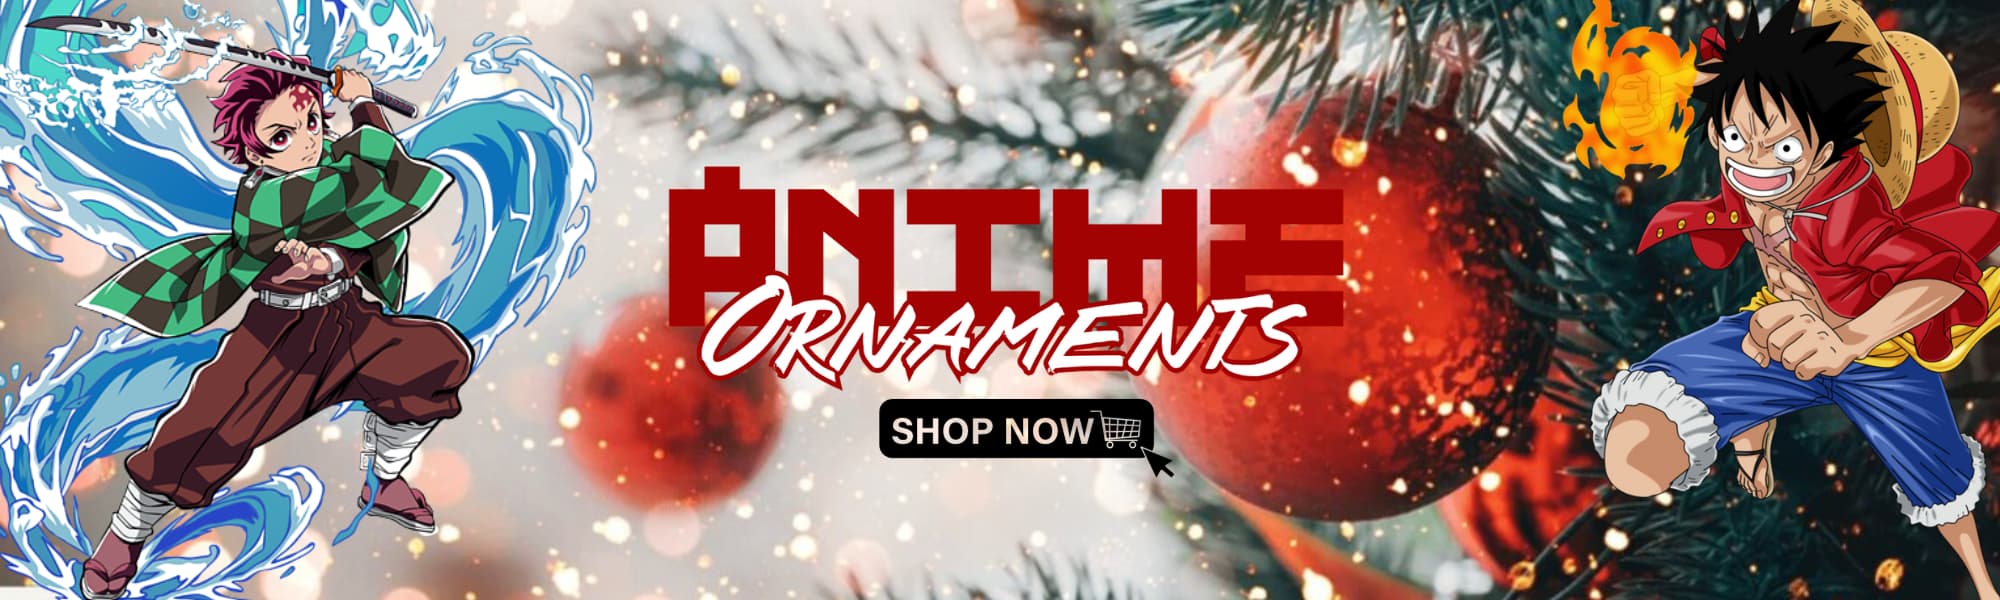 Anime Ornaments Store Banner